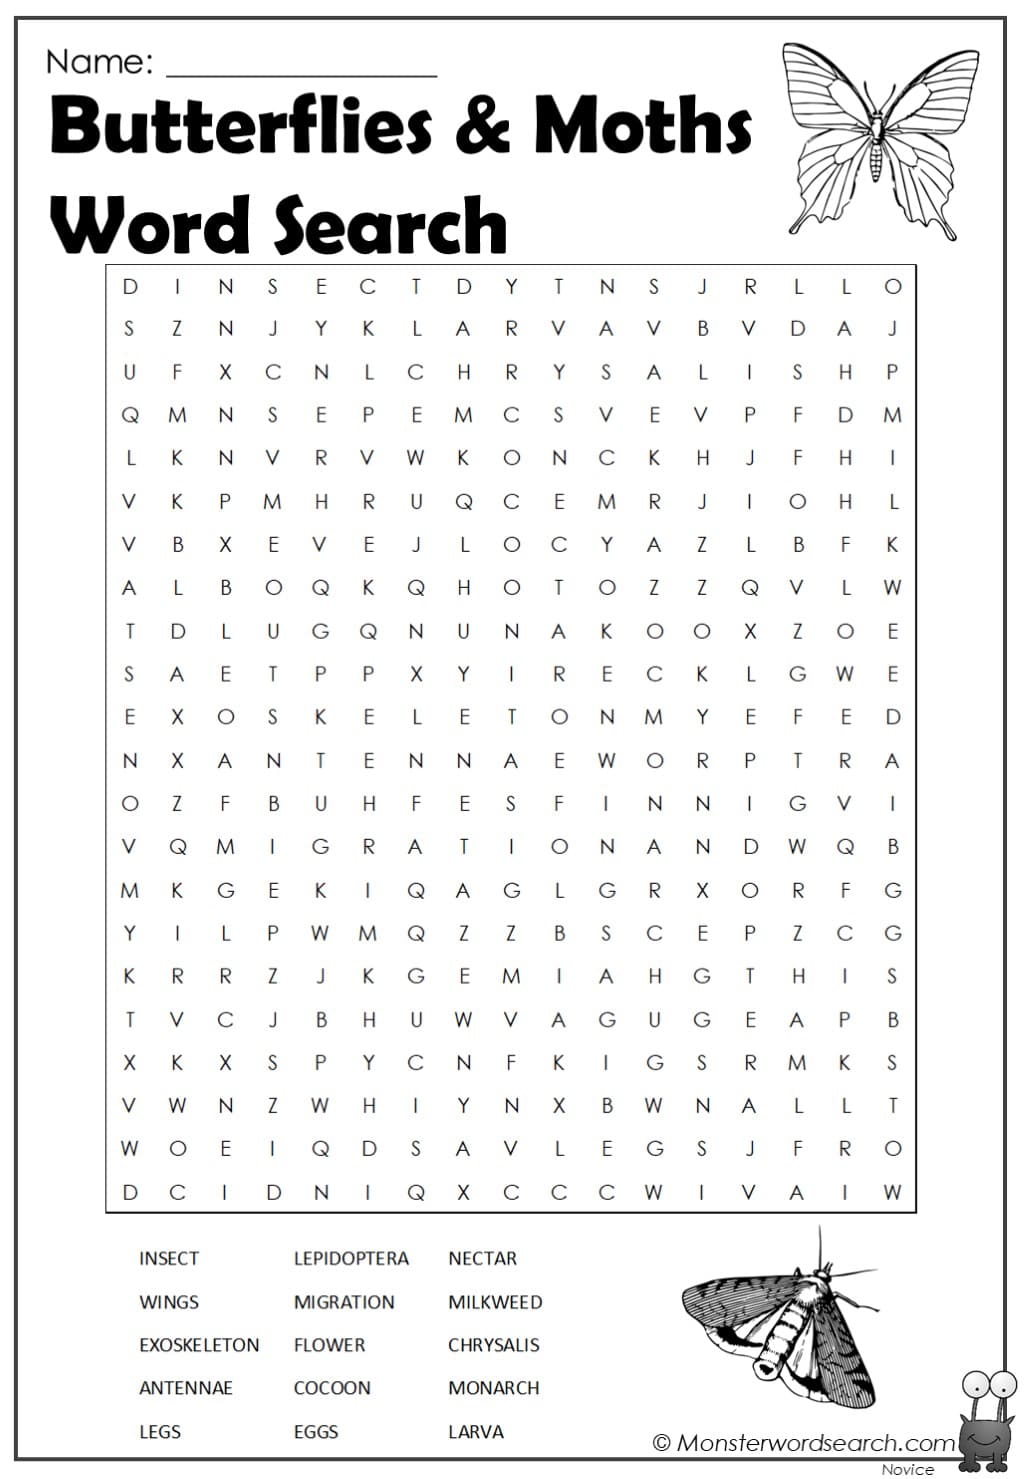 butterflies moths word search - Monster Word Search